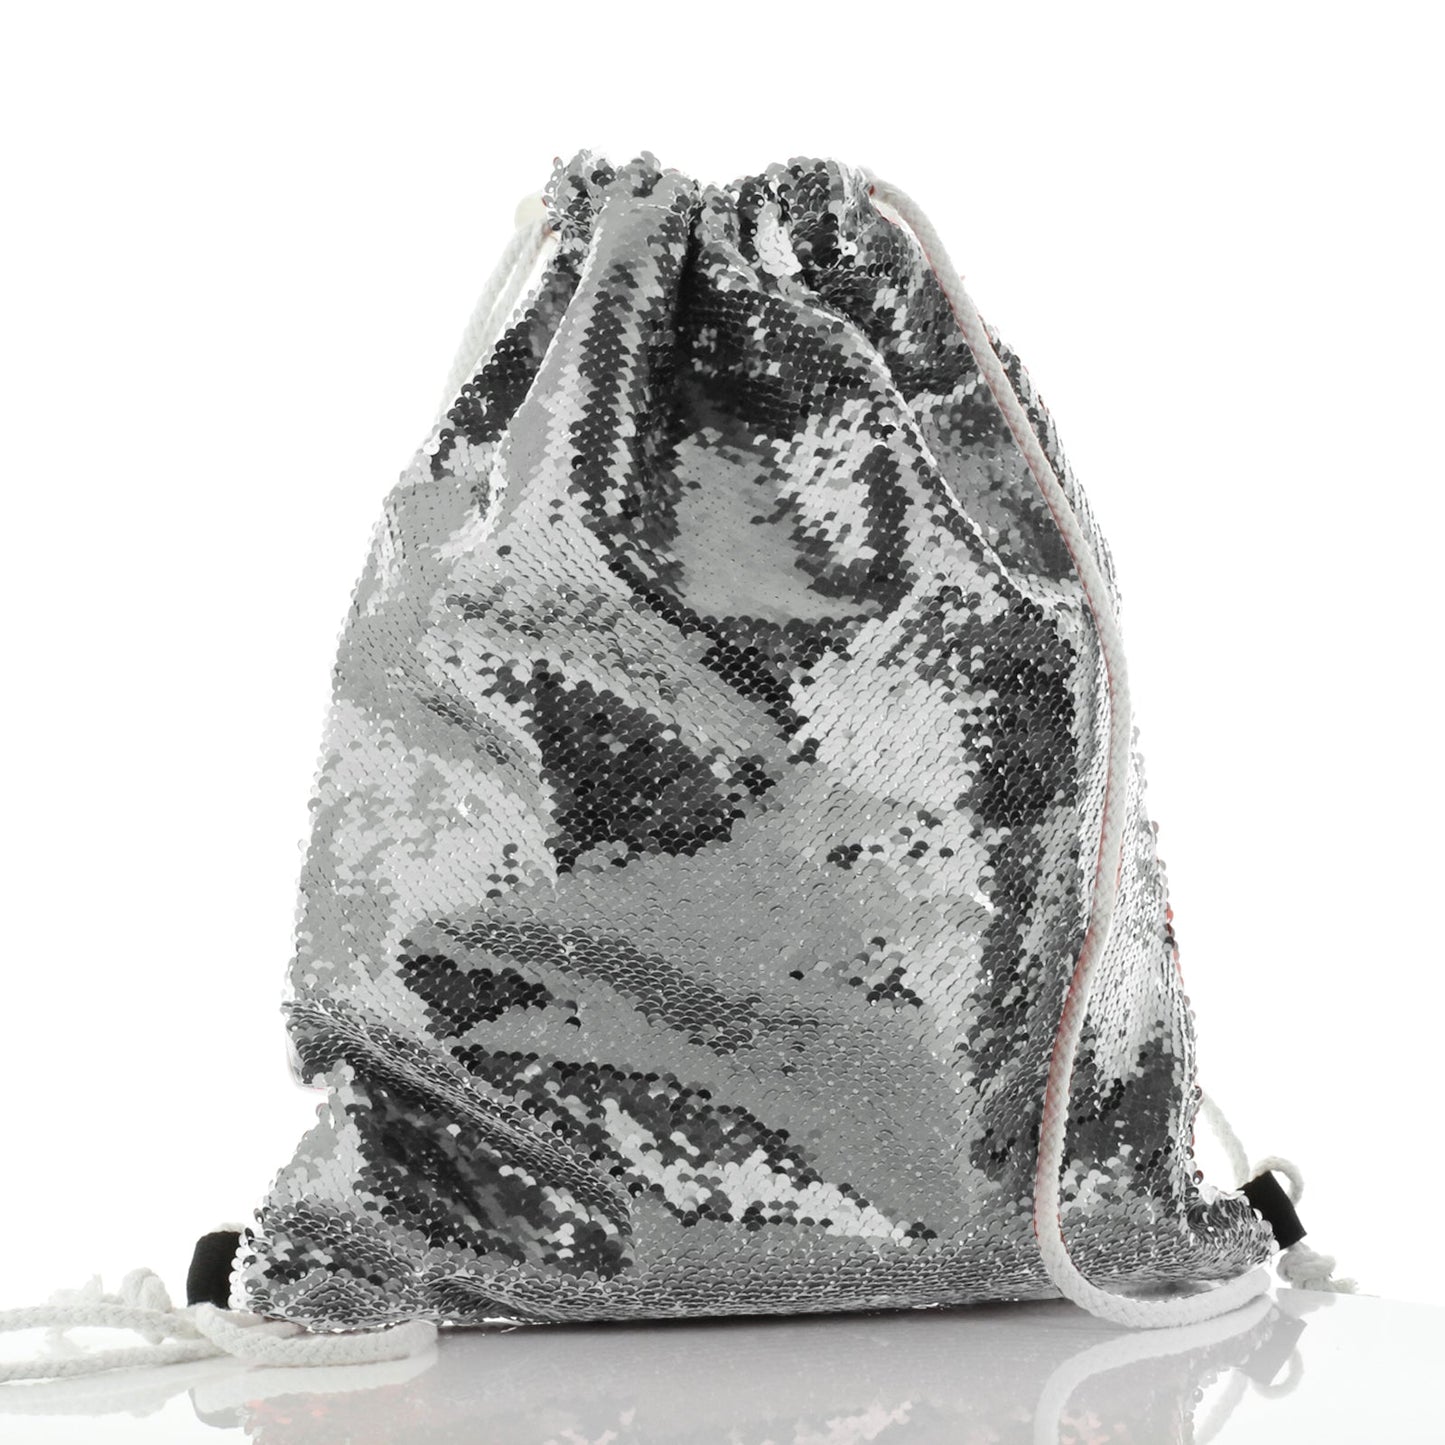 Personalised Sequin Drawstring Backpack with Spot Cat and Leaves and Cute Text